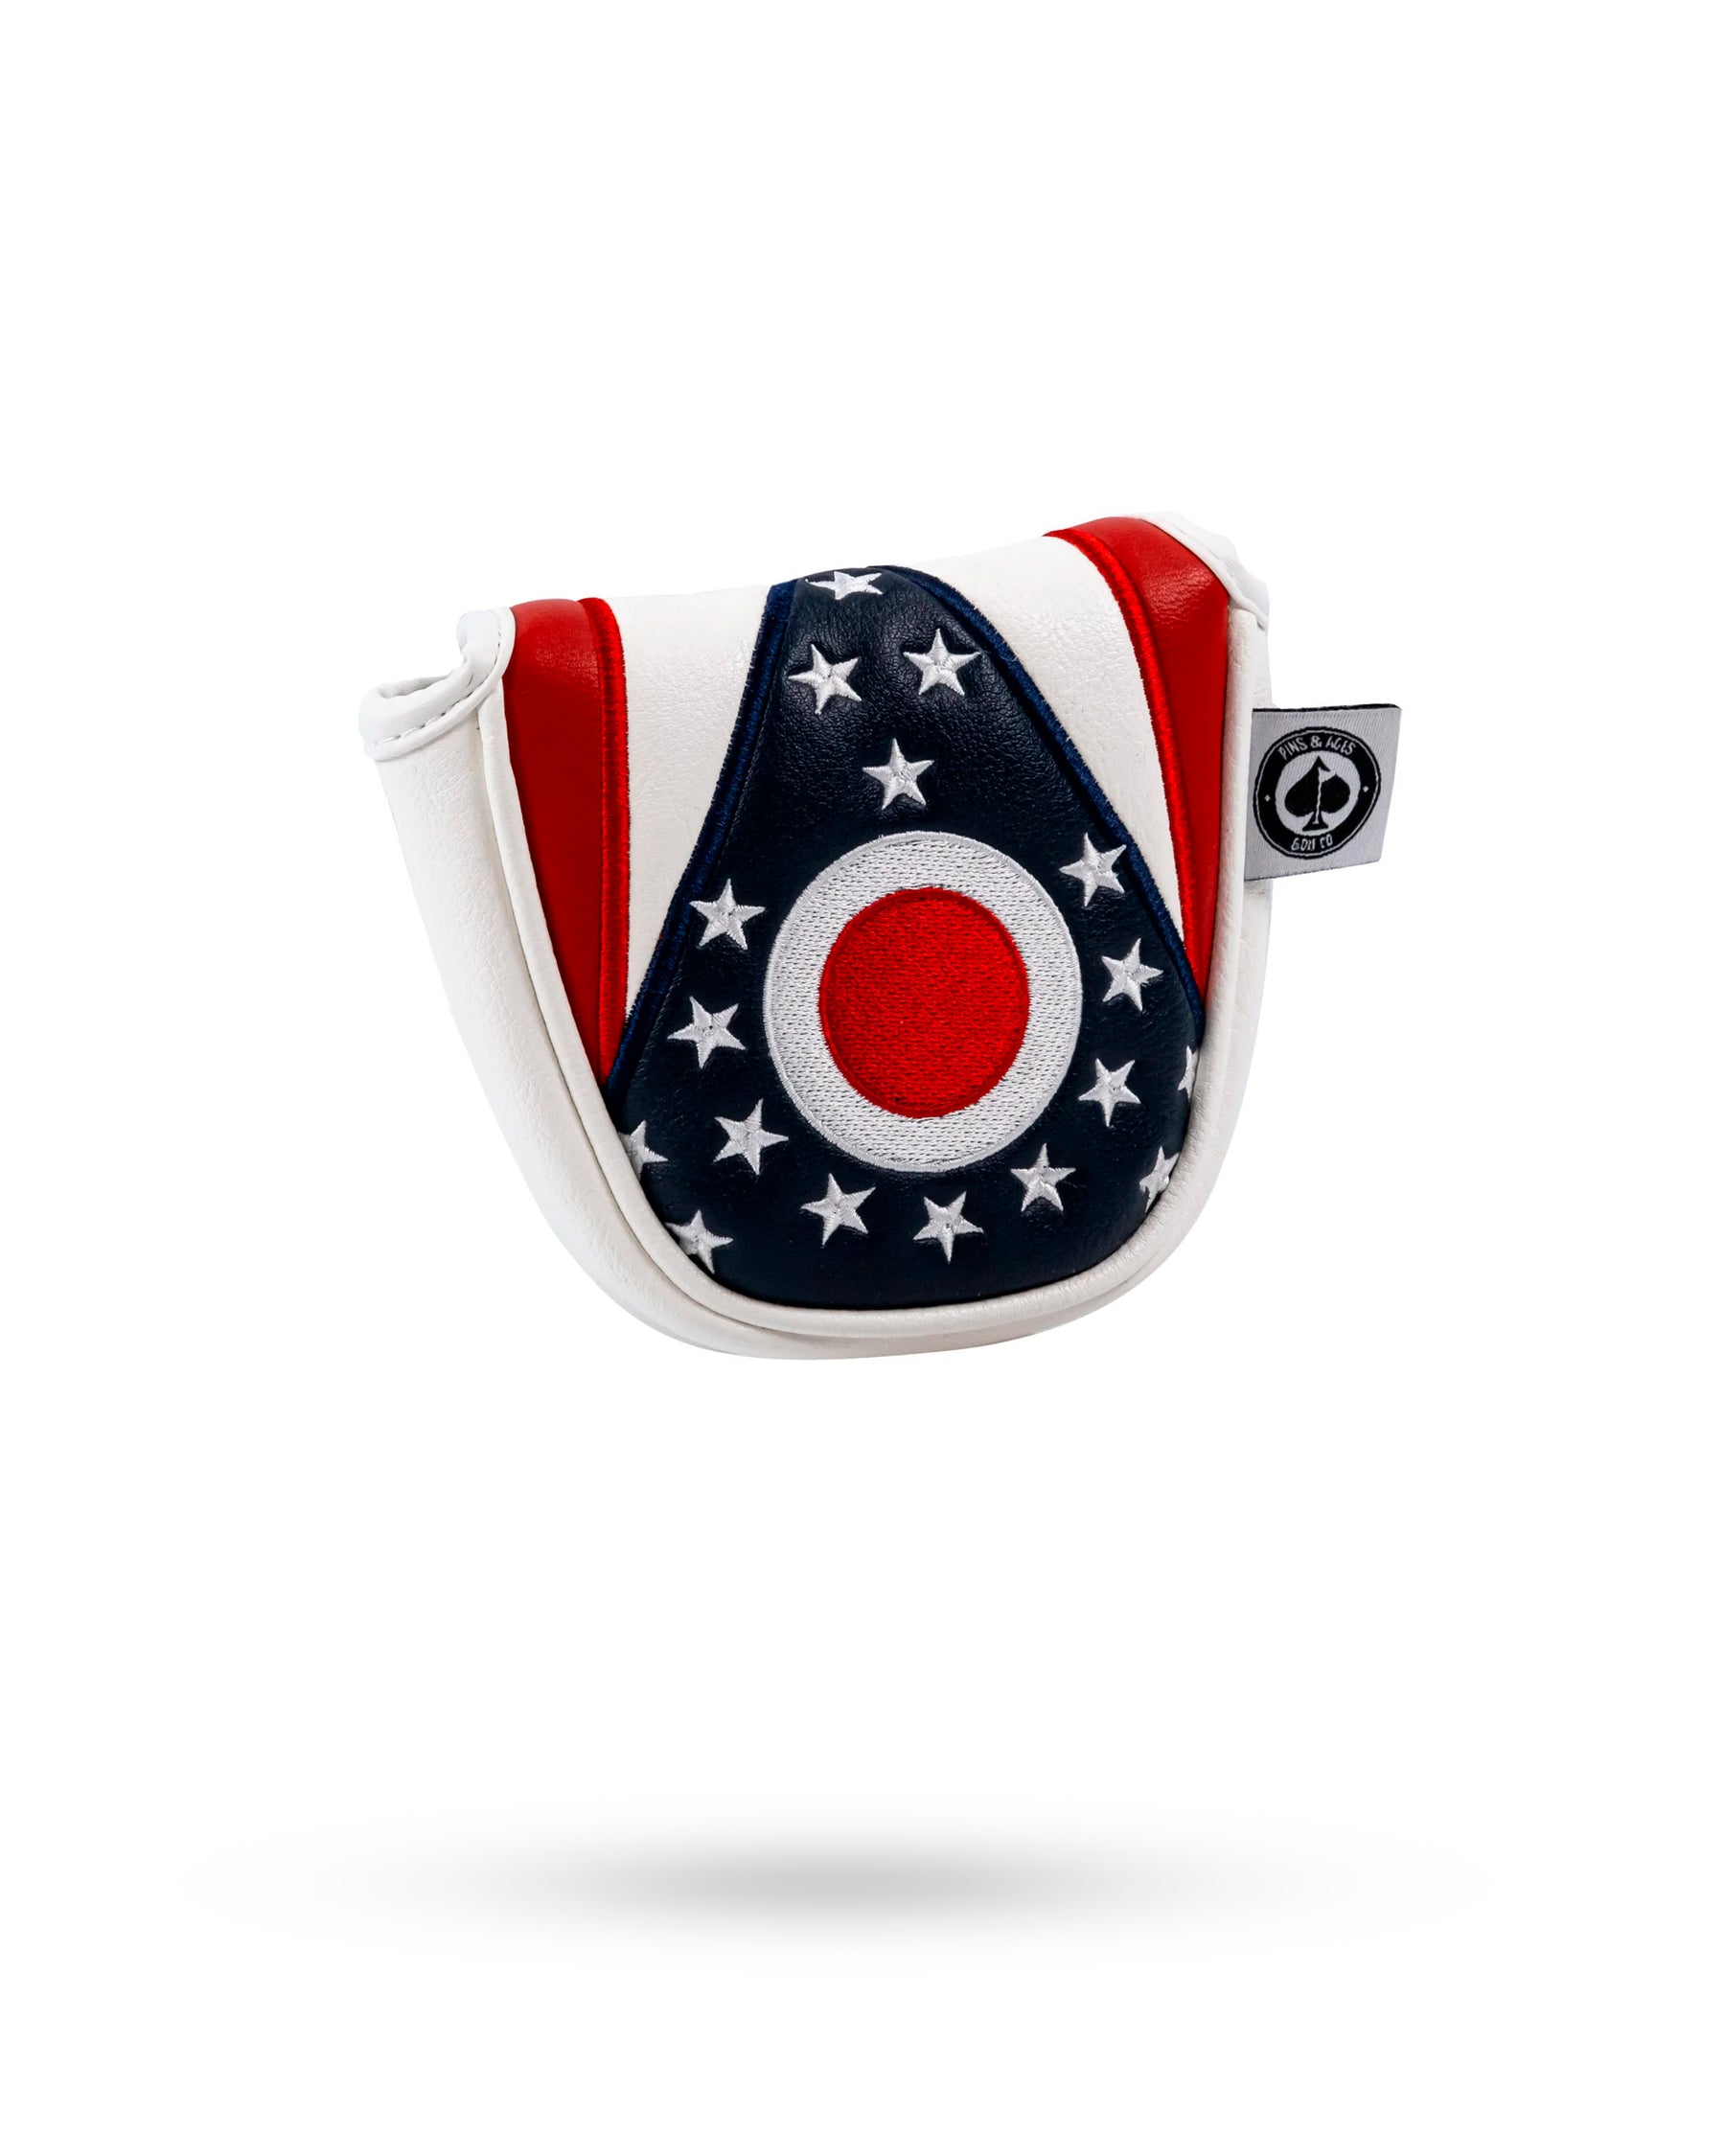 Ohio State Flag - Mallet Putter Cover